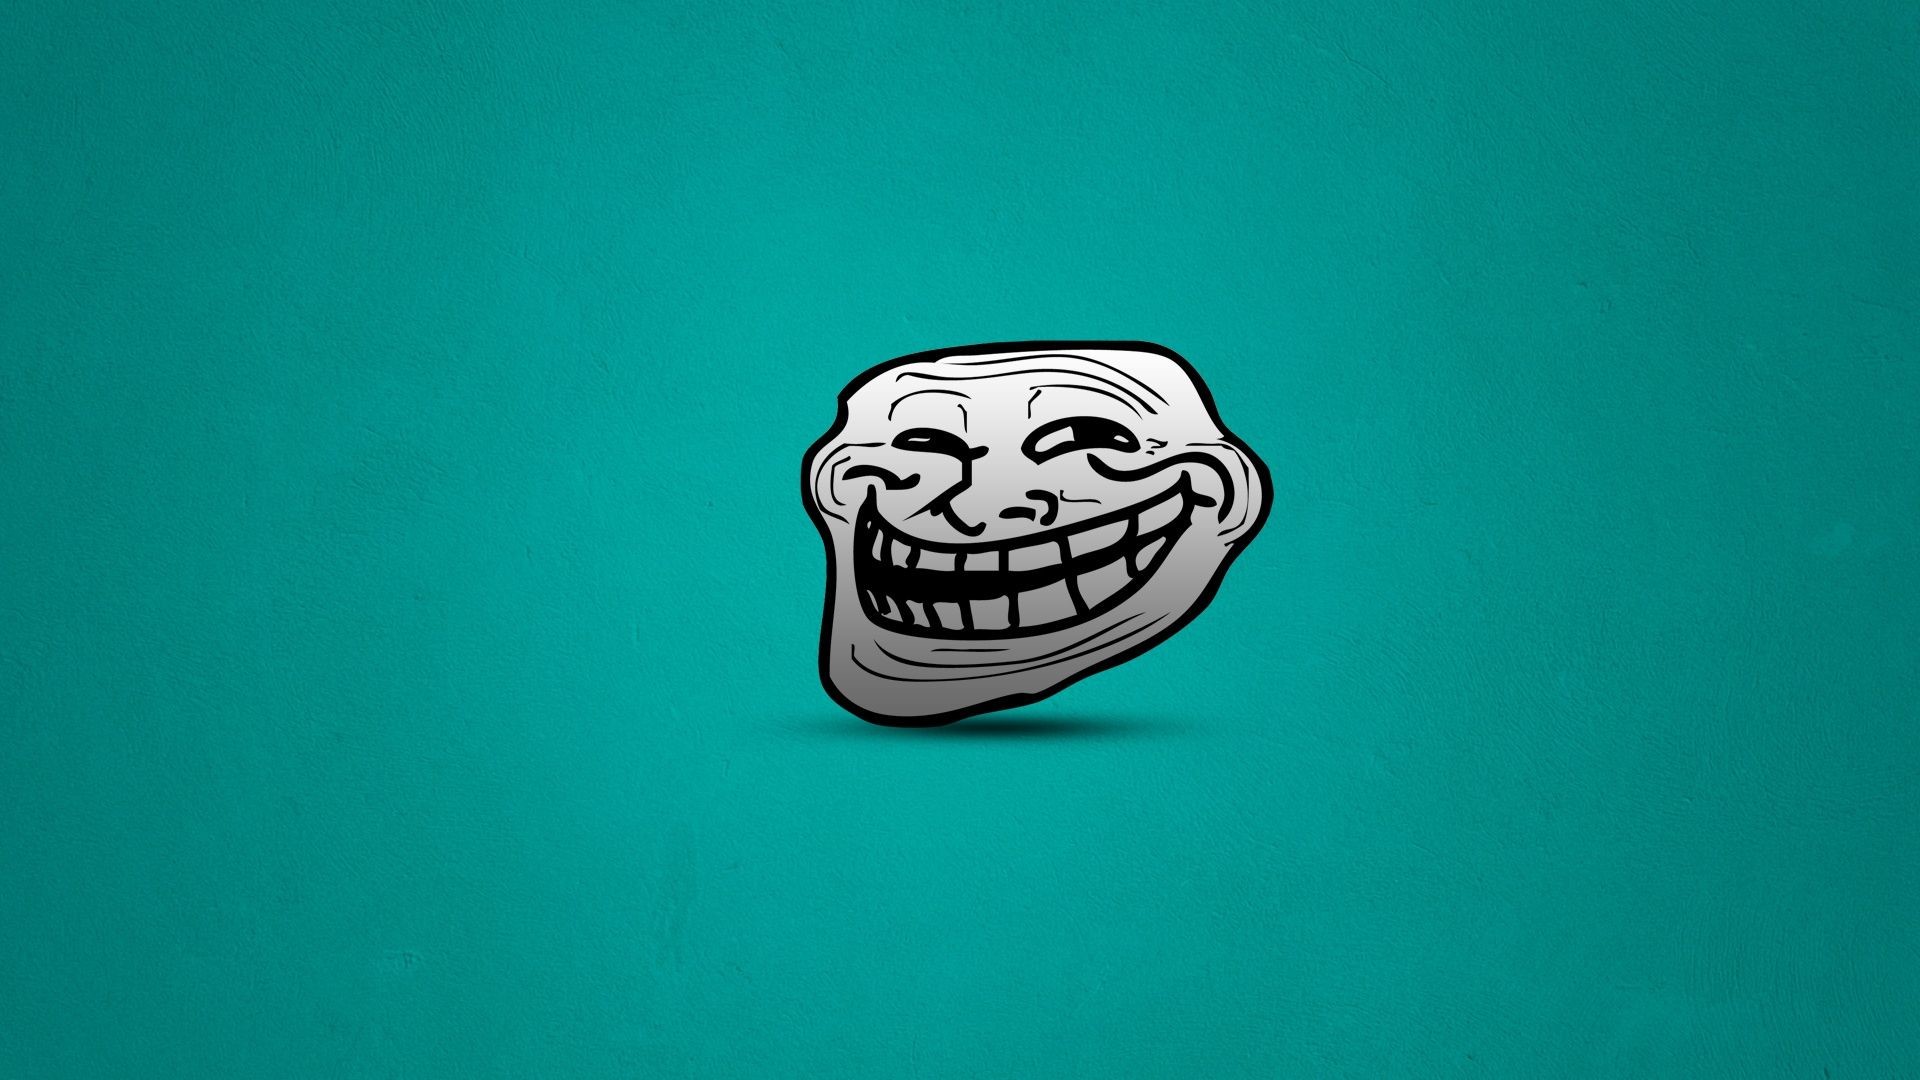 1920x1080 Find out: Funny Troll Face wallpaper on http://hdpicorner.com/